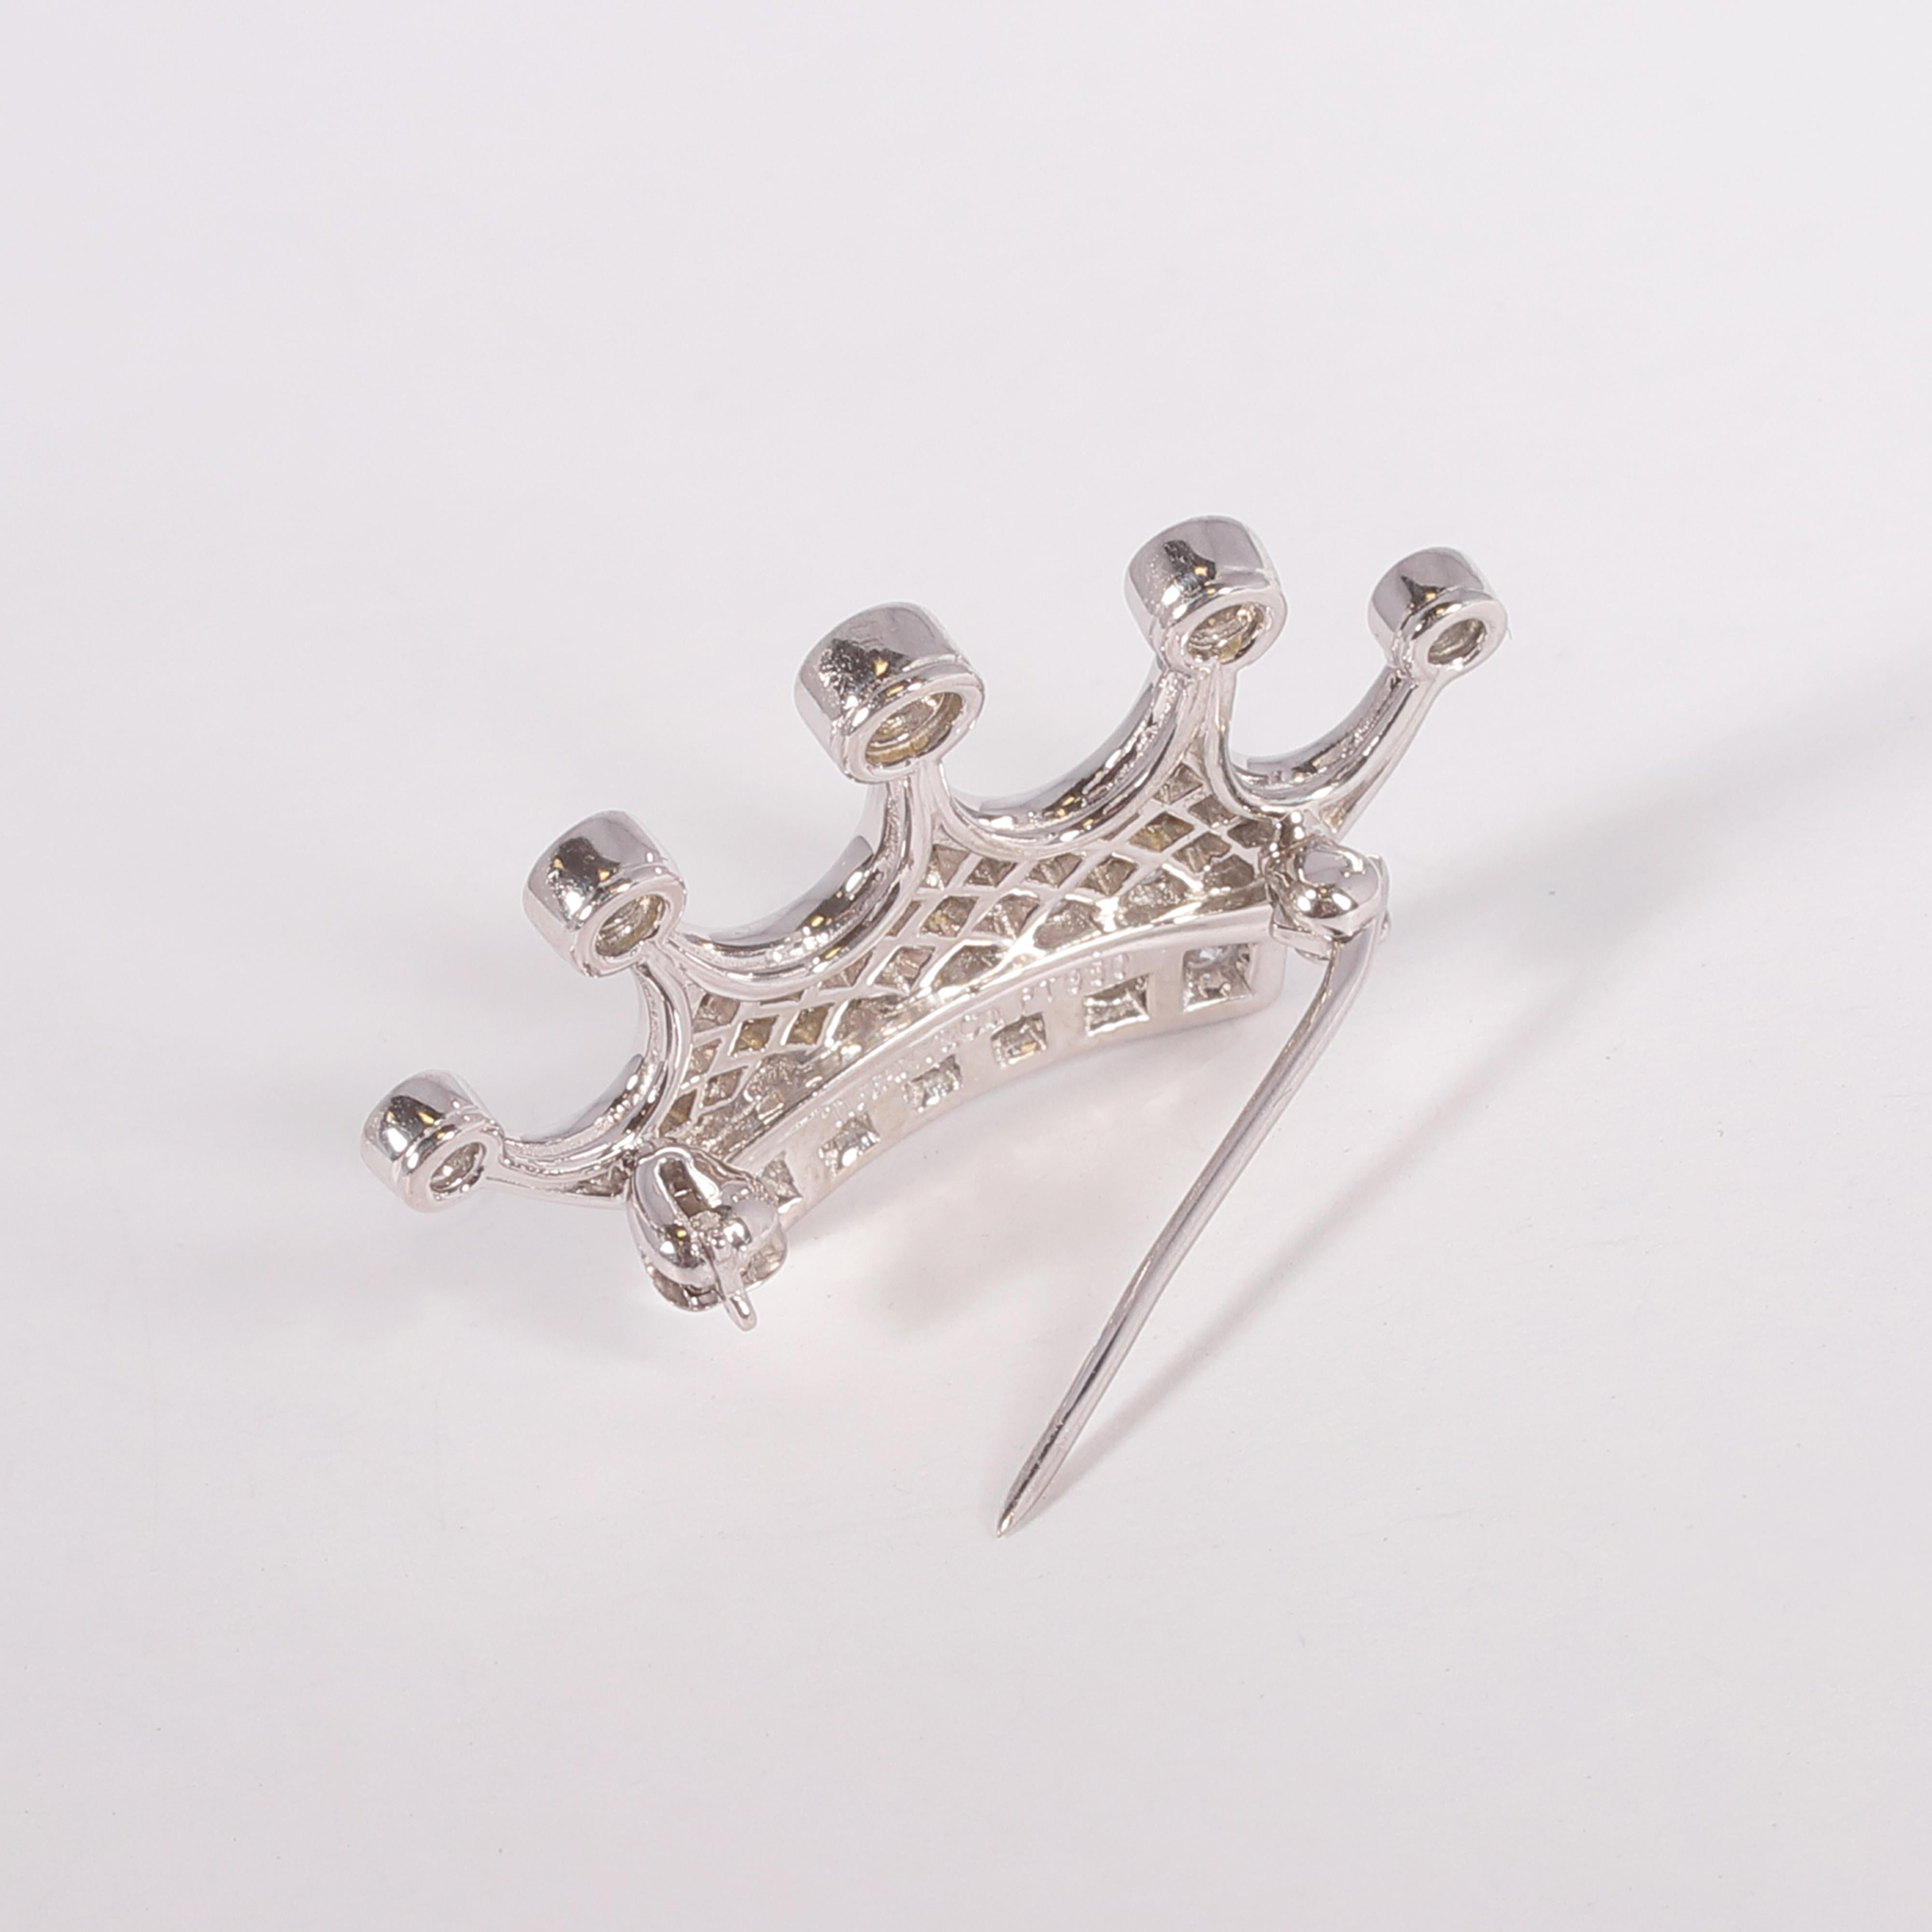 A lovely platinum and 1.00 carat diamond crown brooch by Tiffany & Co. for the royalty in your life!  This petite brooch is secured with a straight line clasp and would be the perfect accent to that scarf!  